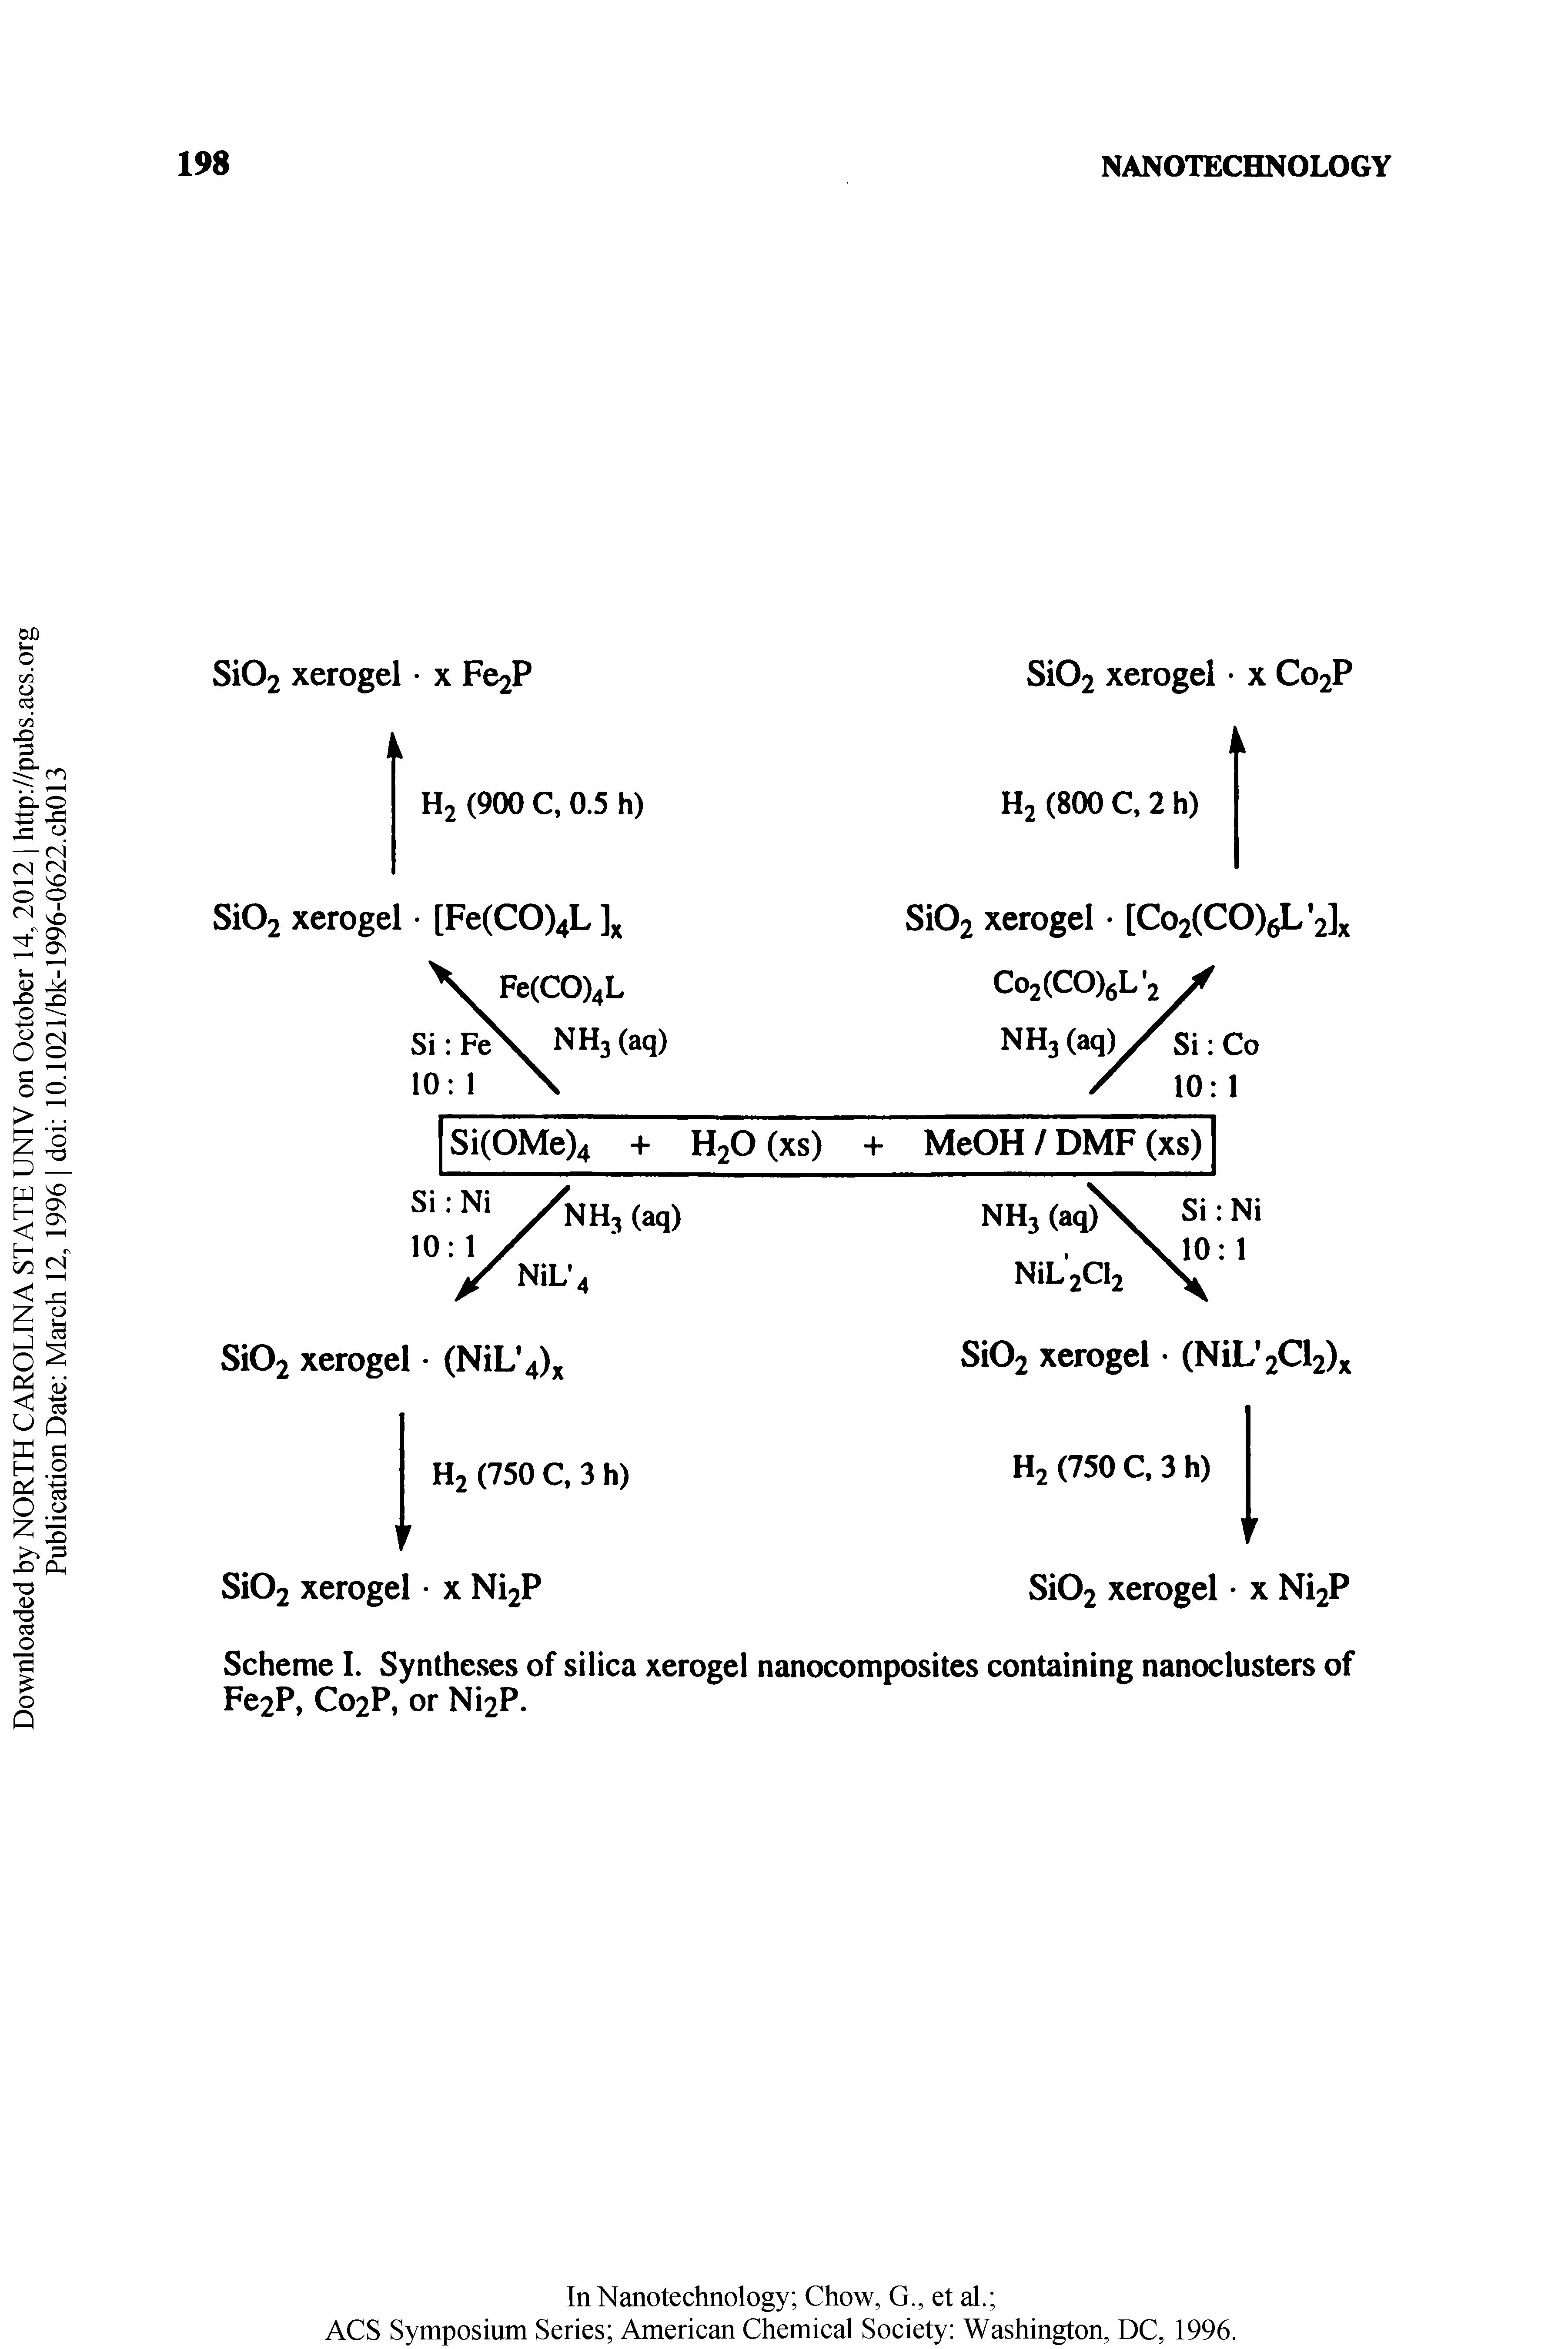 Scheme I. Syntheses of silica xerogel nanocomposites containing nanoclusters of Fe2P, C02P, or Ni2P.